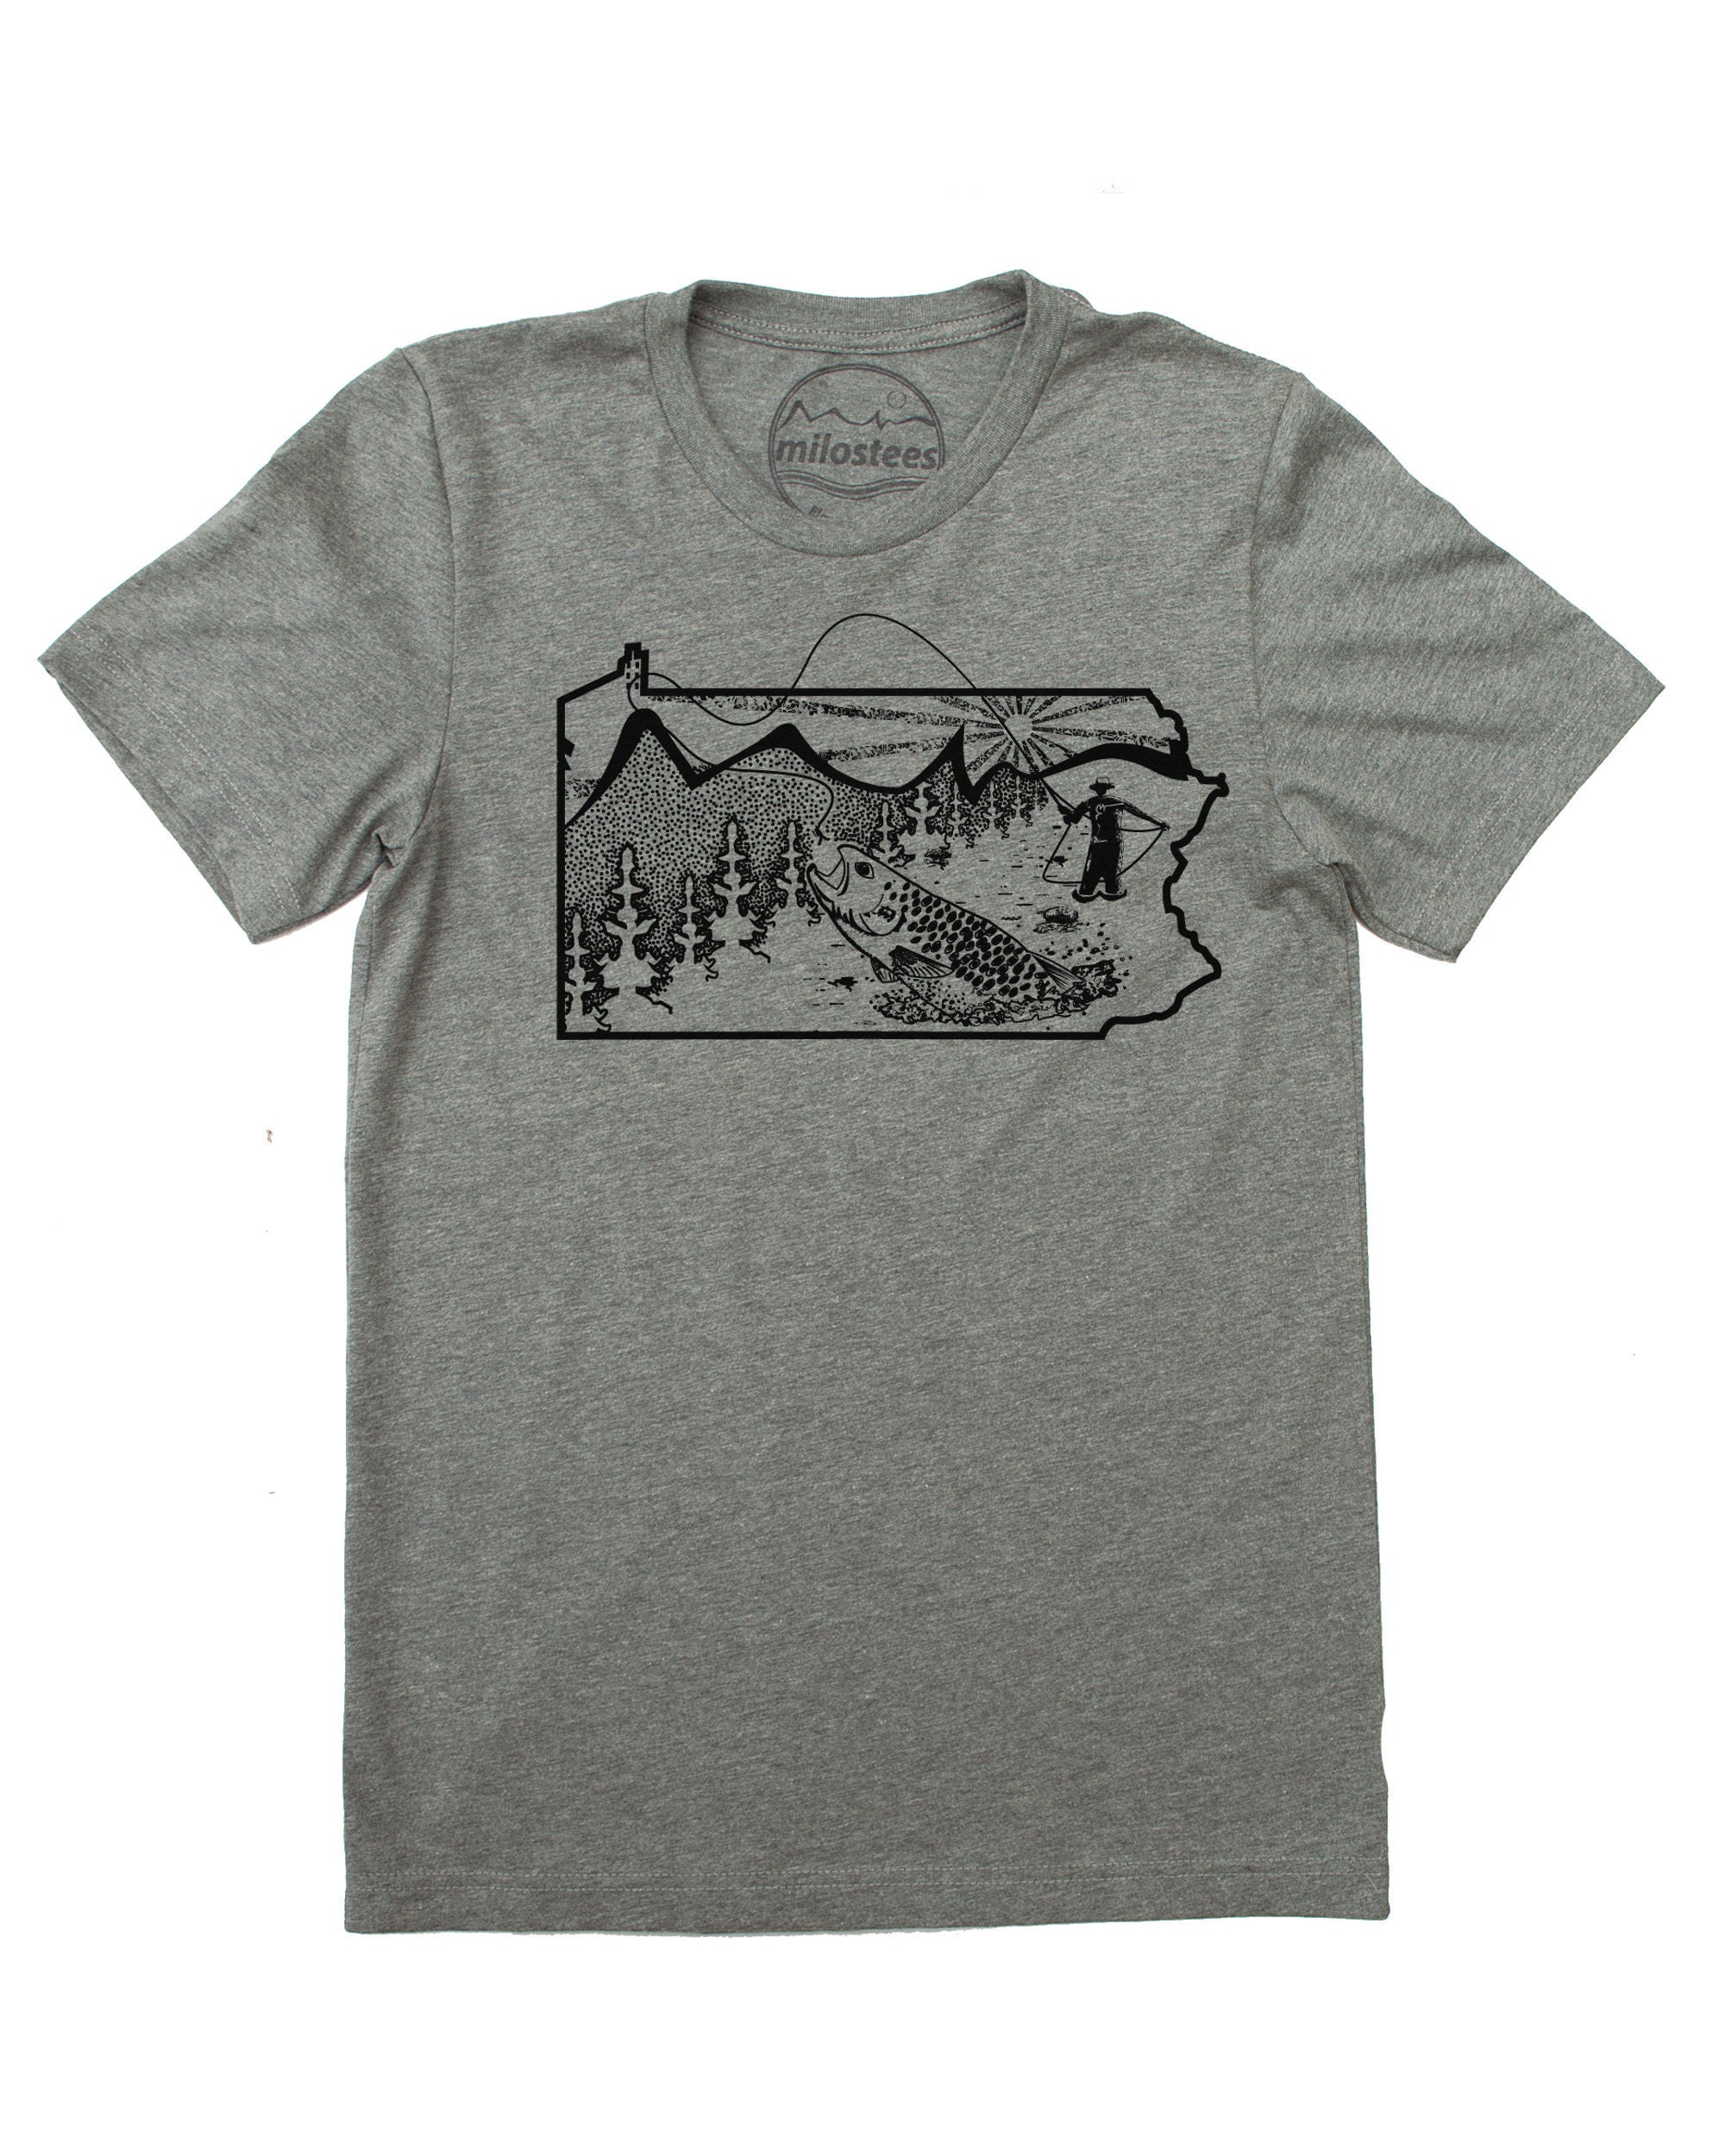 Pennsylvania T Shirt, Fisherman Apparel with Original Fly Fish Illustration On Soft Tee for Fishing The Delaware River or Pittsburgh Wear!